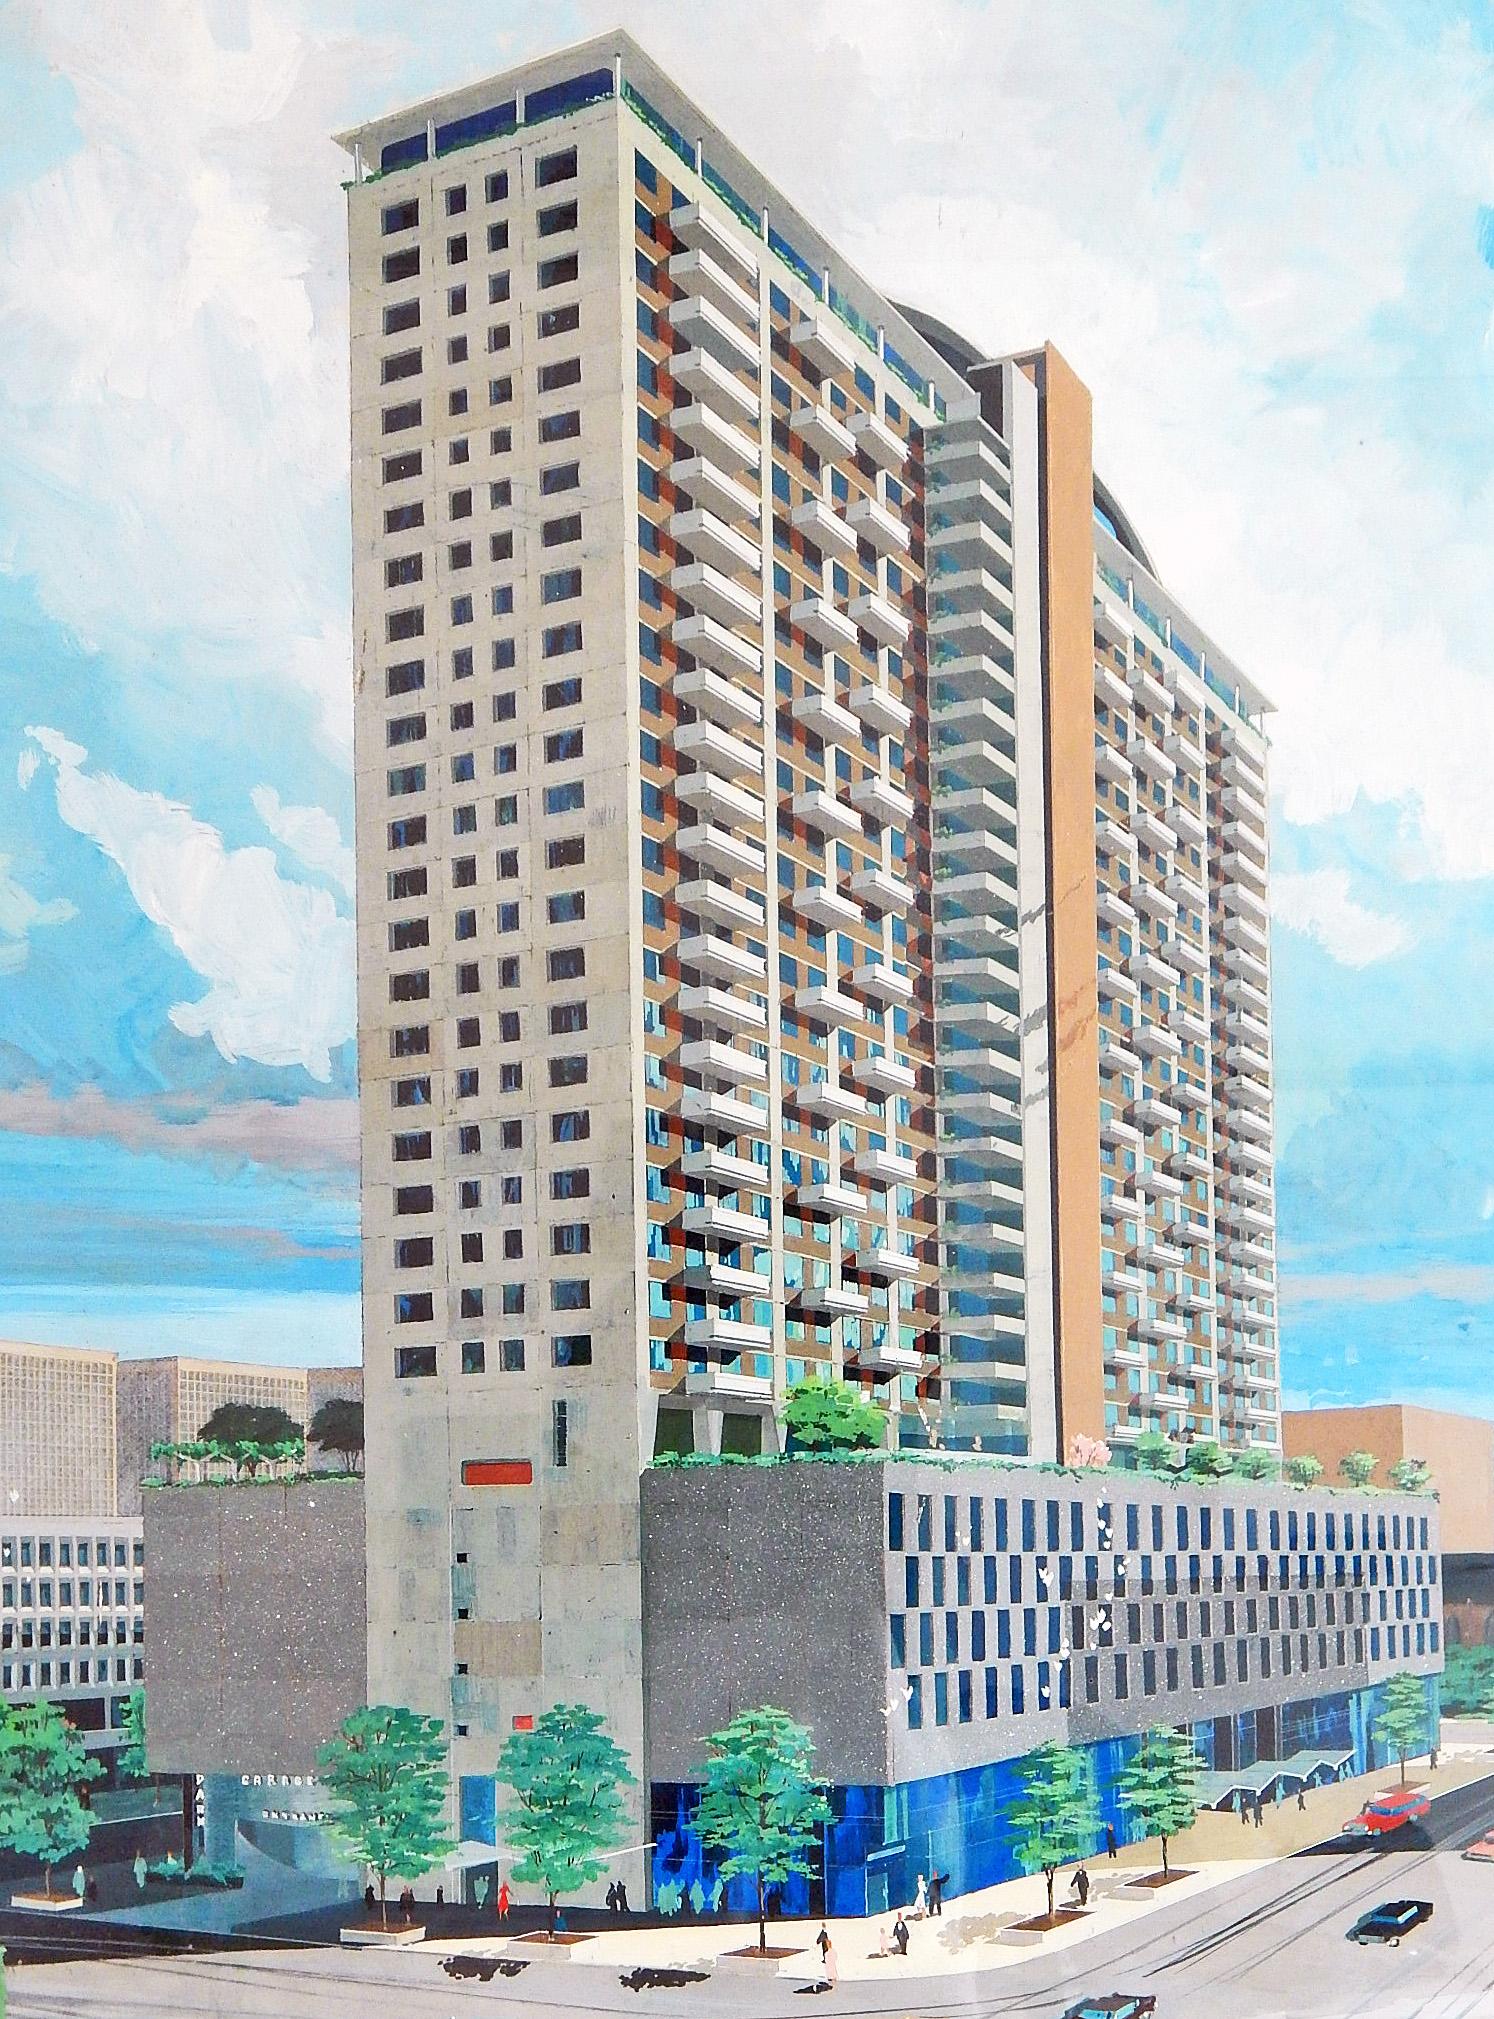 One of the finest midcentury architectural renderings we have ever seen, this large and vivid painting executed in gouache and oil on board was created by the Cleveland architectural firm of Richard Hawley Cutting Associates around 1960. Although